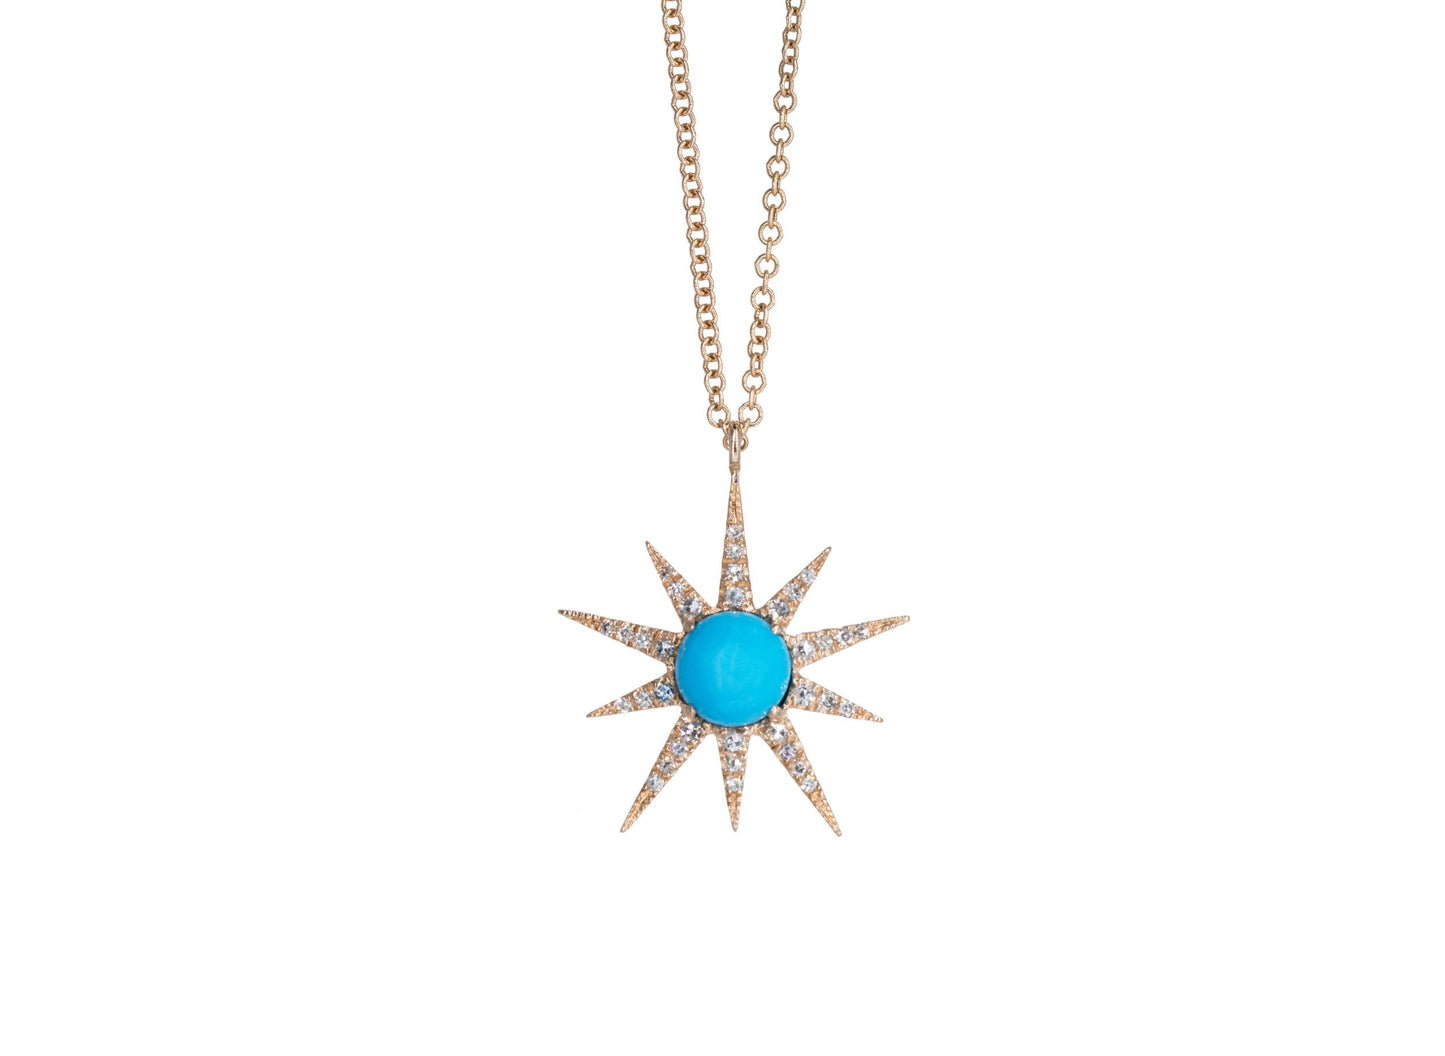 14KT Rose Gold Diamond Pave and Turquoise Starburst Necklace